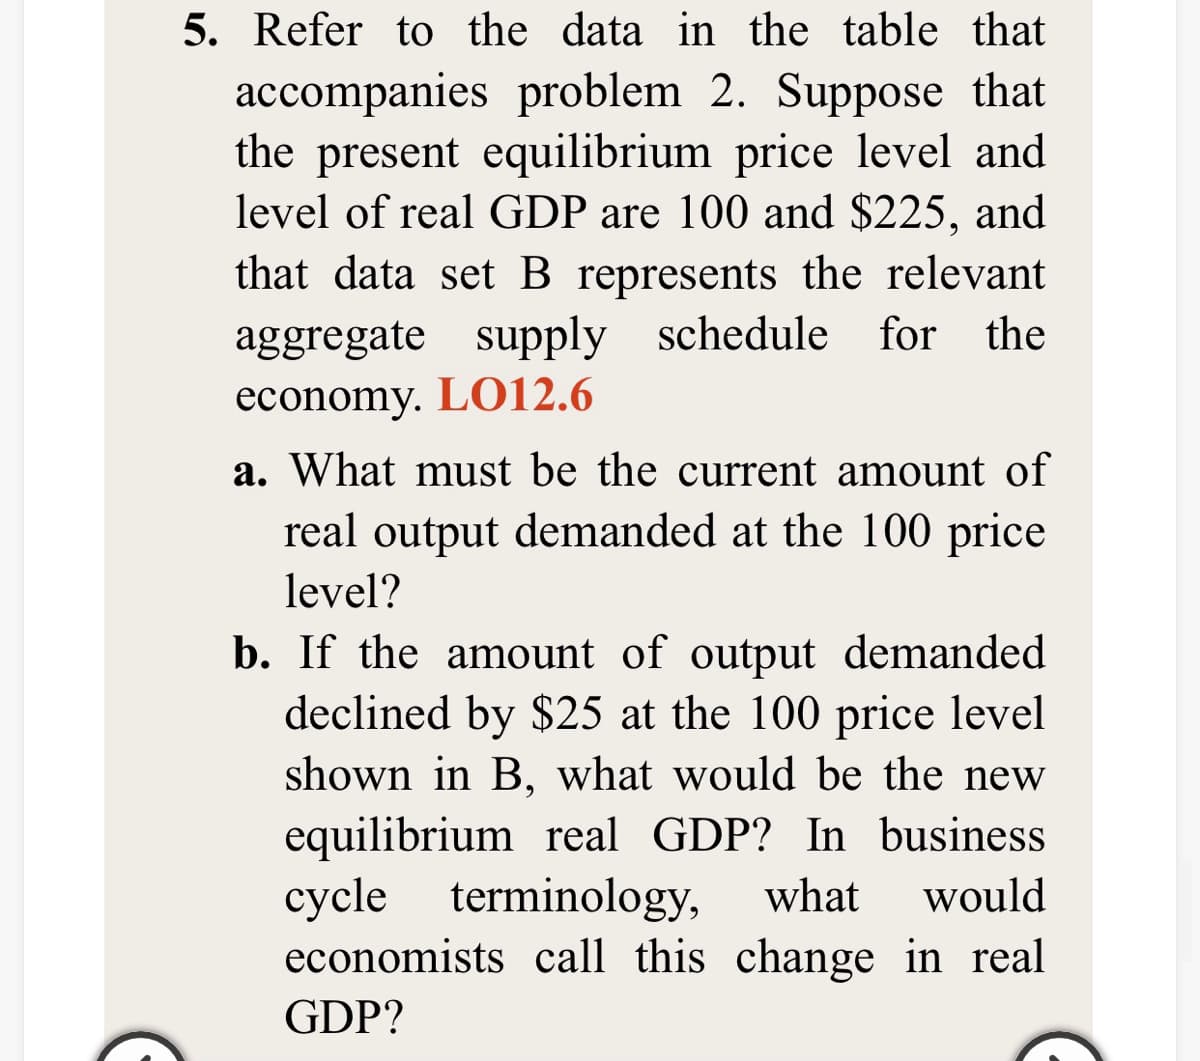 5. Refer to the data in the table that
accompanies problem 2. Suppose that
the present equilibrium price level and
level of real GDP are 100 and $225, and
that data set B represents the relevant
aggregate supply schedule for the
economy. LO12.6
a. What must be the current amount of
real output demanded at the 100 price
level?
b. If the amount of output demanded
declined by $25 at the 100 price level
shown in B, what would be the new
equilibrium real GDP? In business
суcle
economists call this change in real
terminology,
what
would
GDP?
